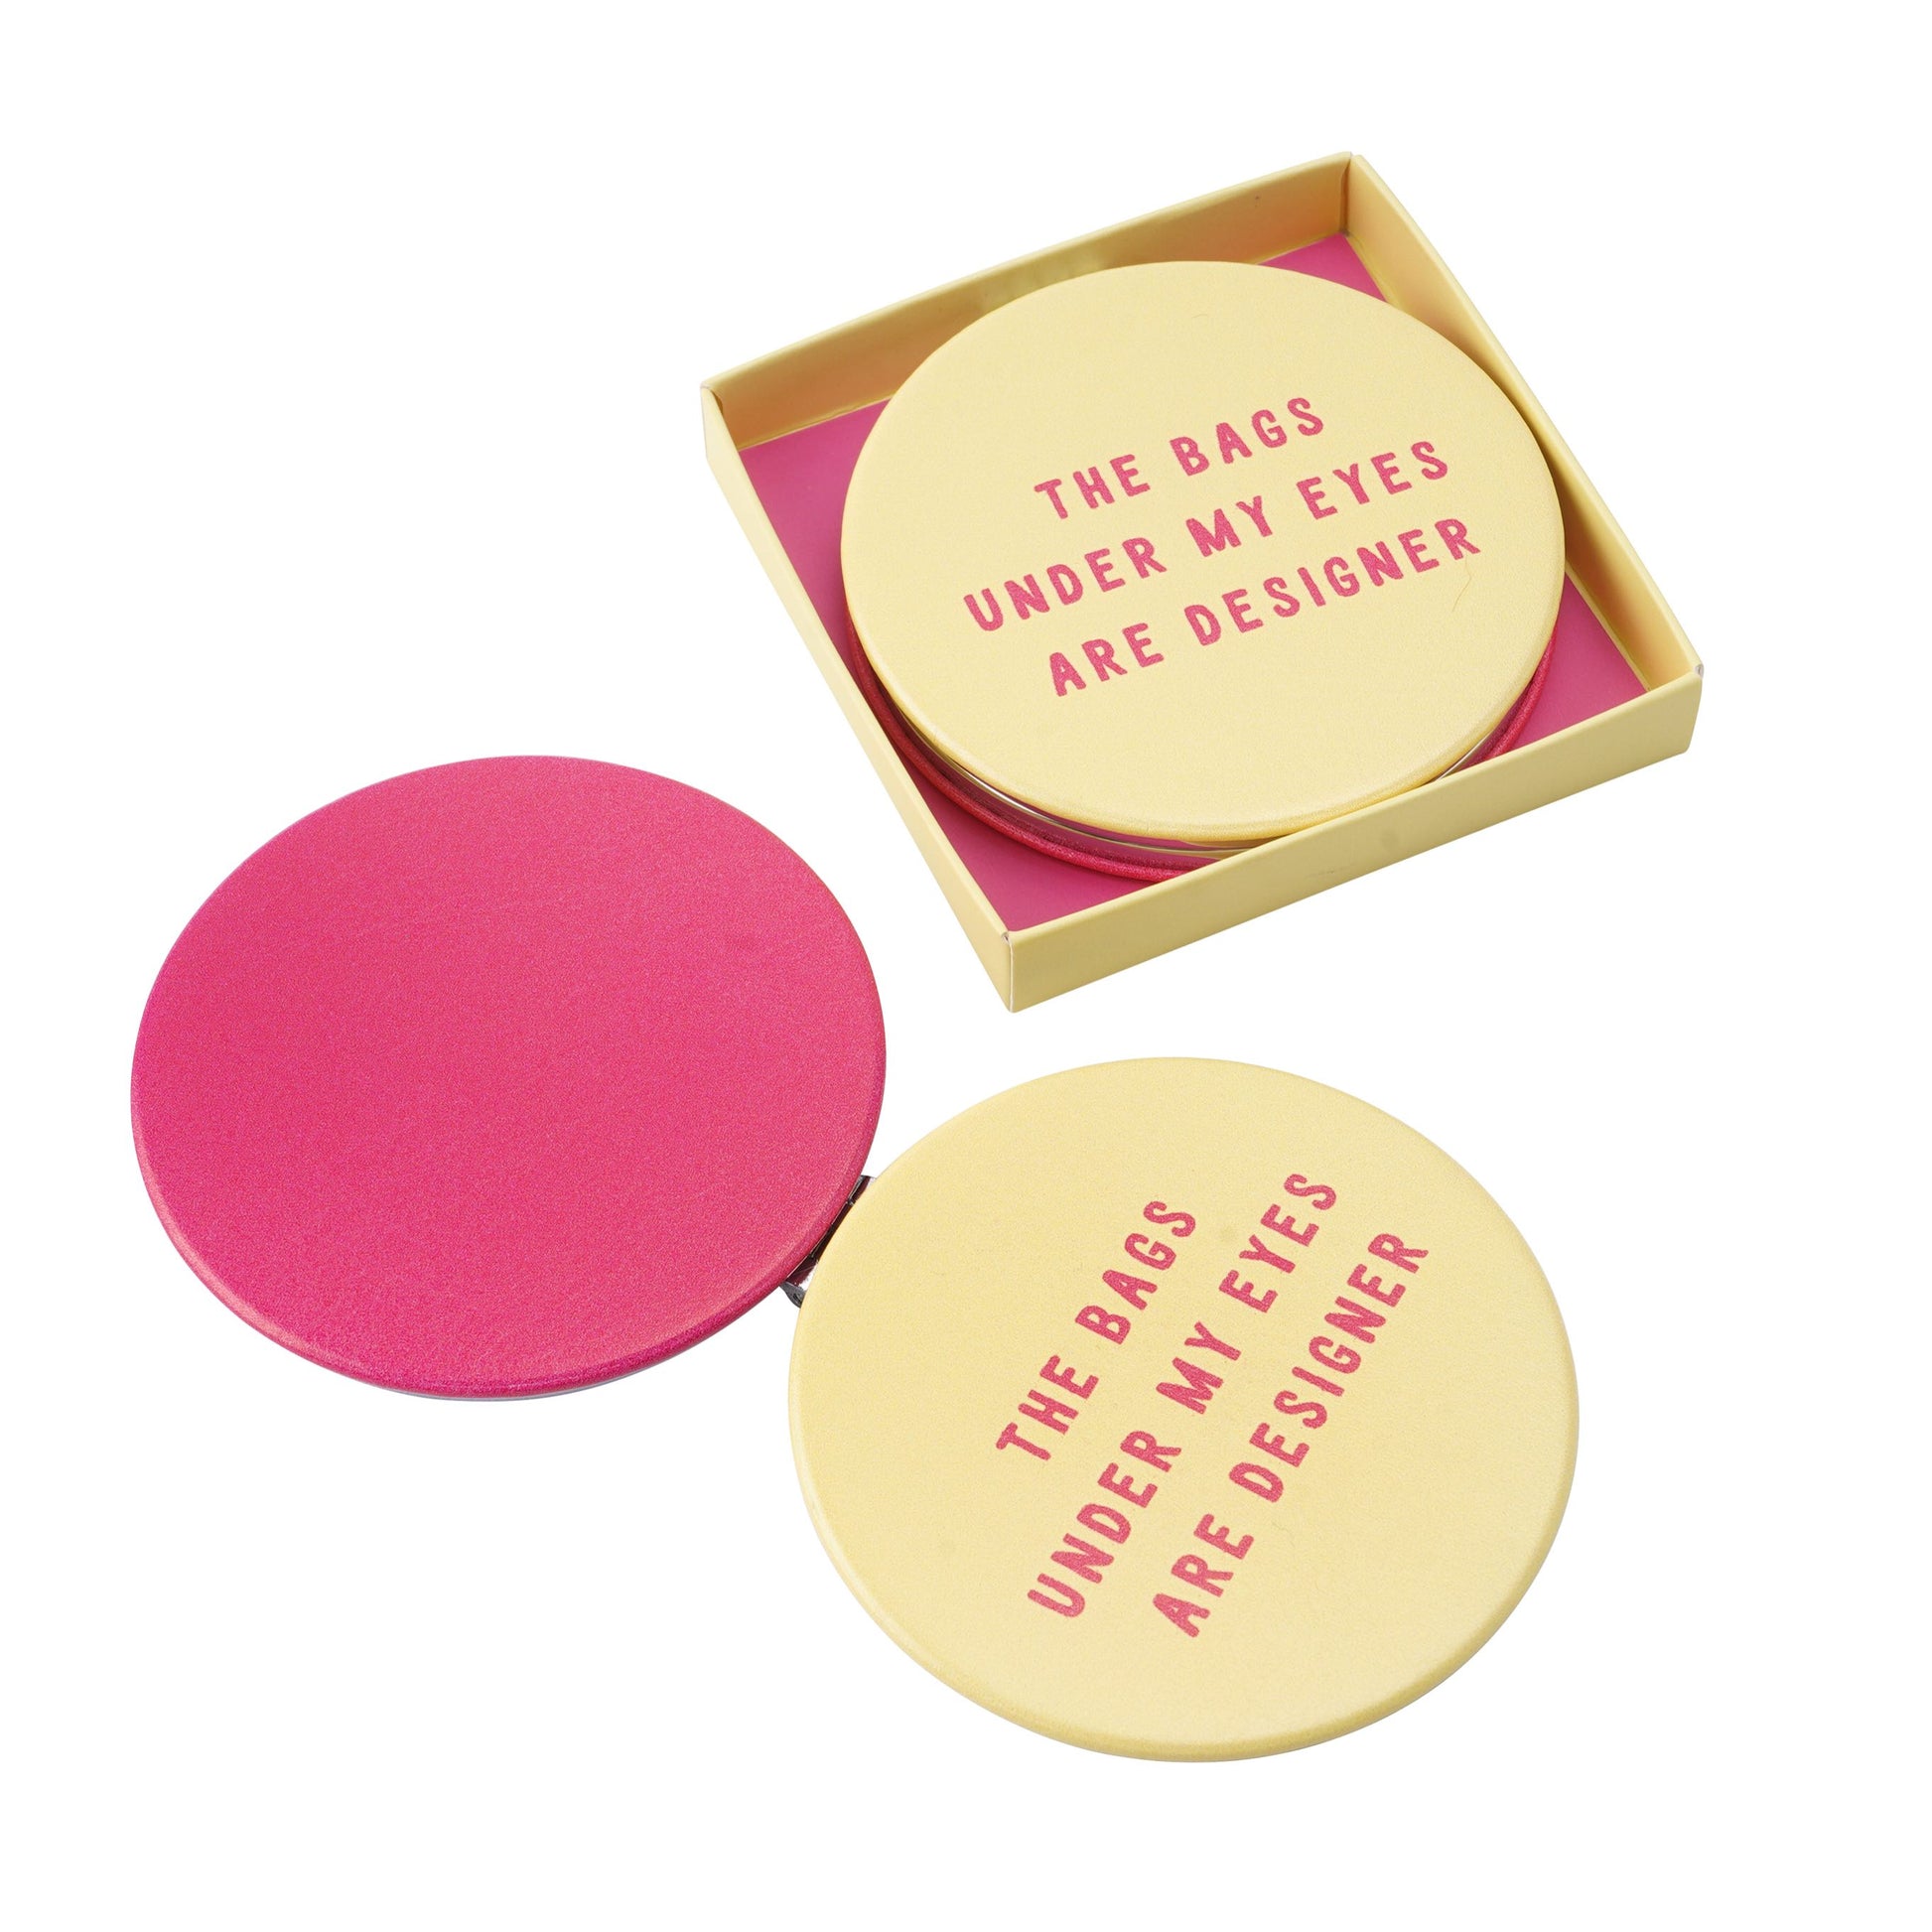 Yellow and pink compact mirror, with the fun slogan The bags under my eyes are designer.